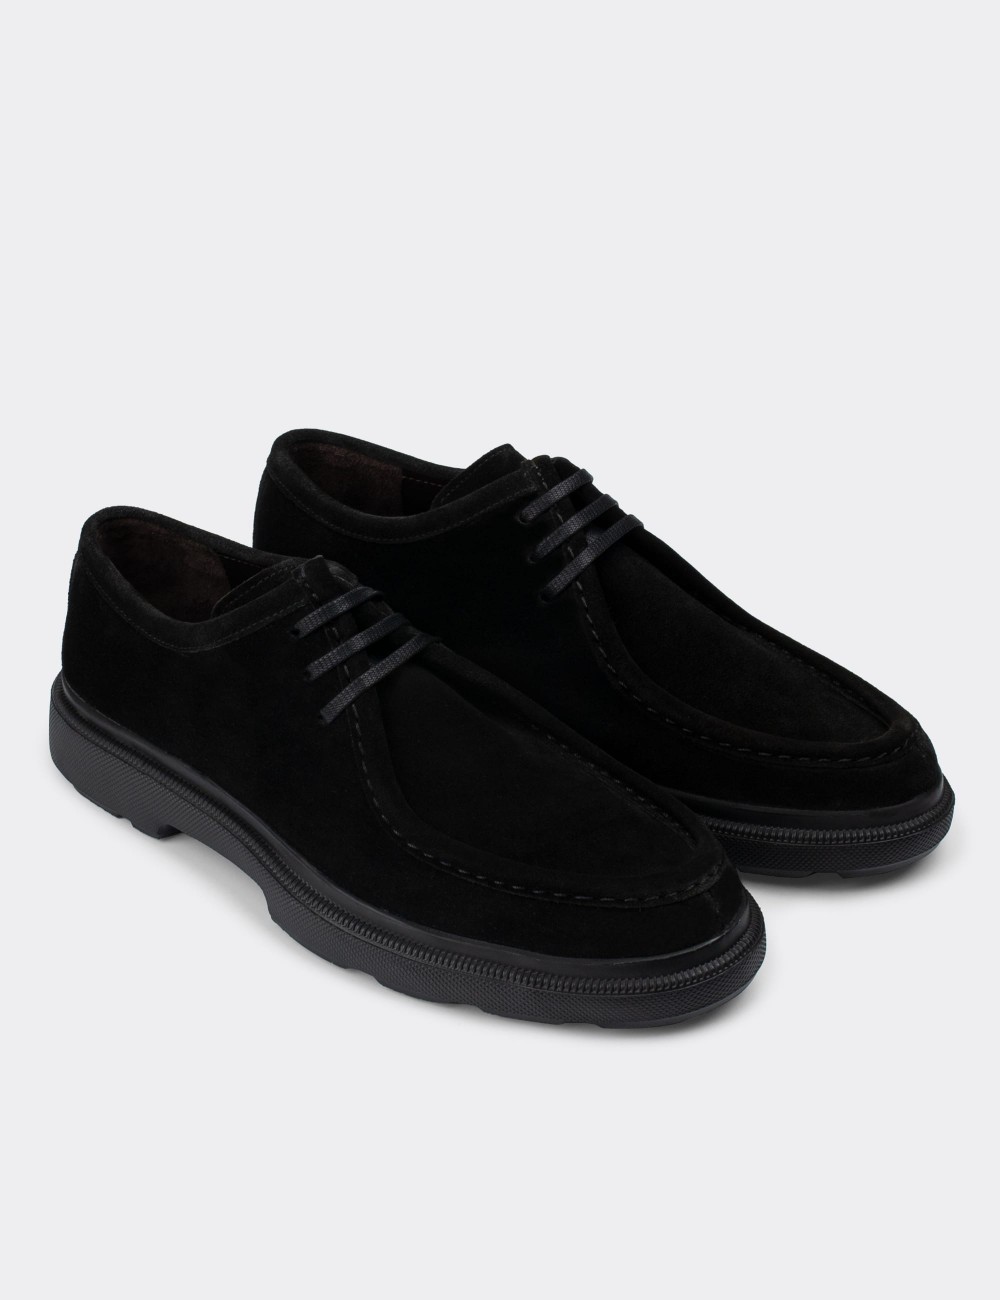 Black Suede Leather Lace-up Shoes - 01851MSYHP01